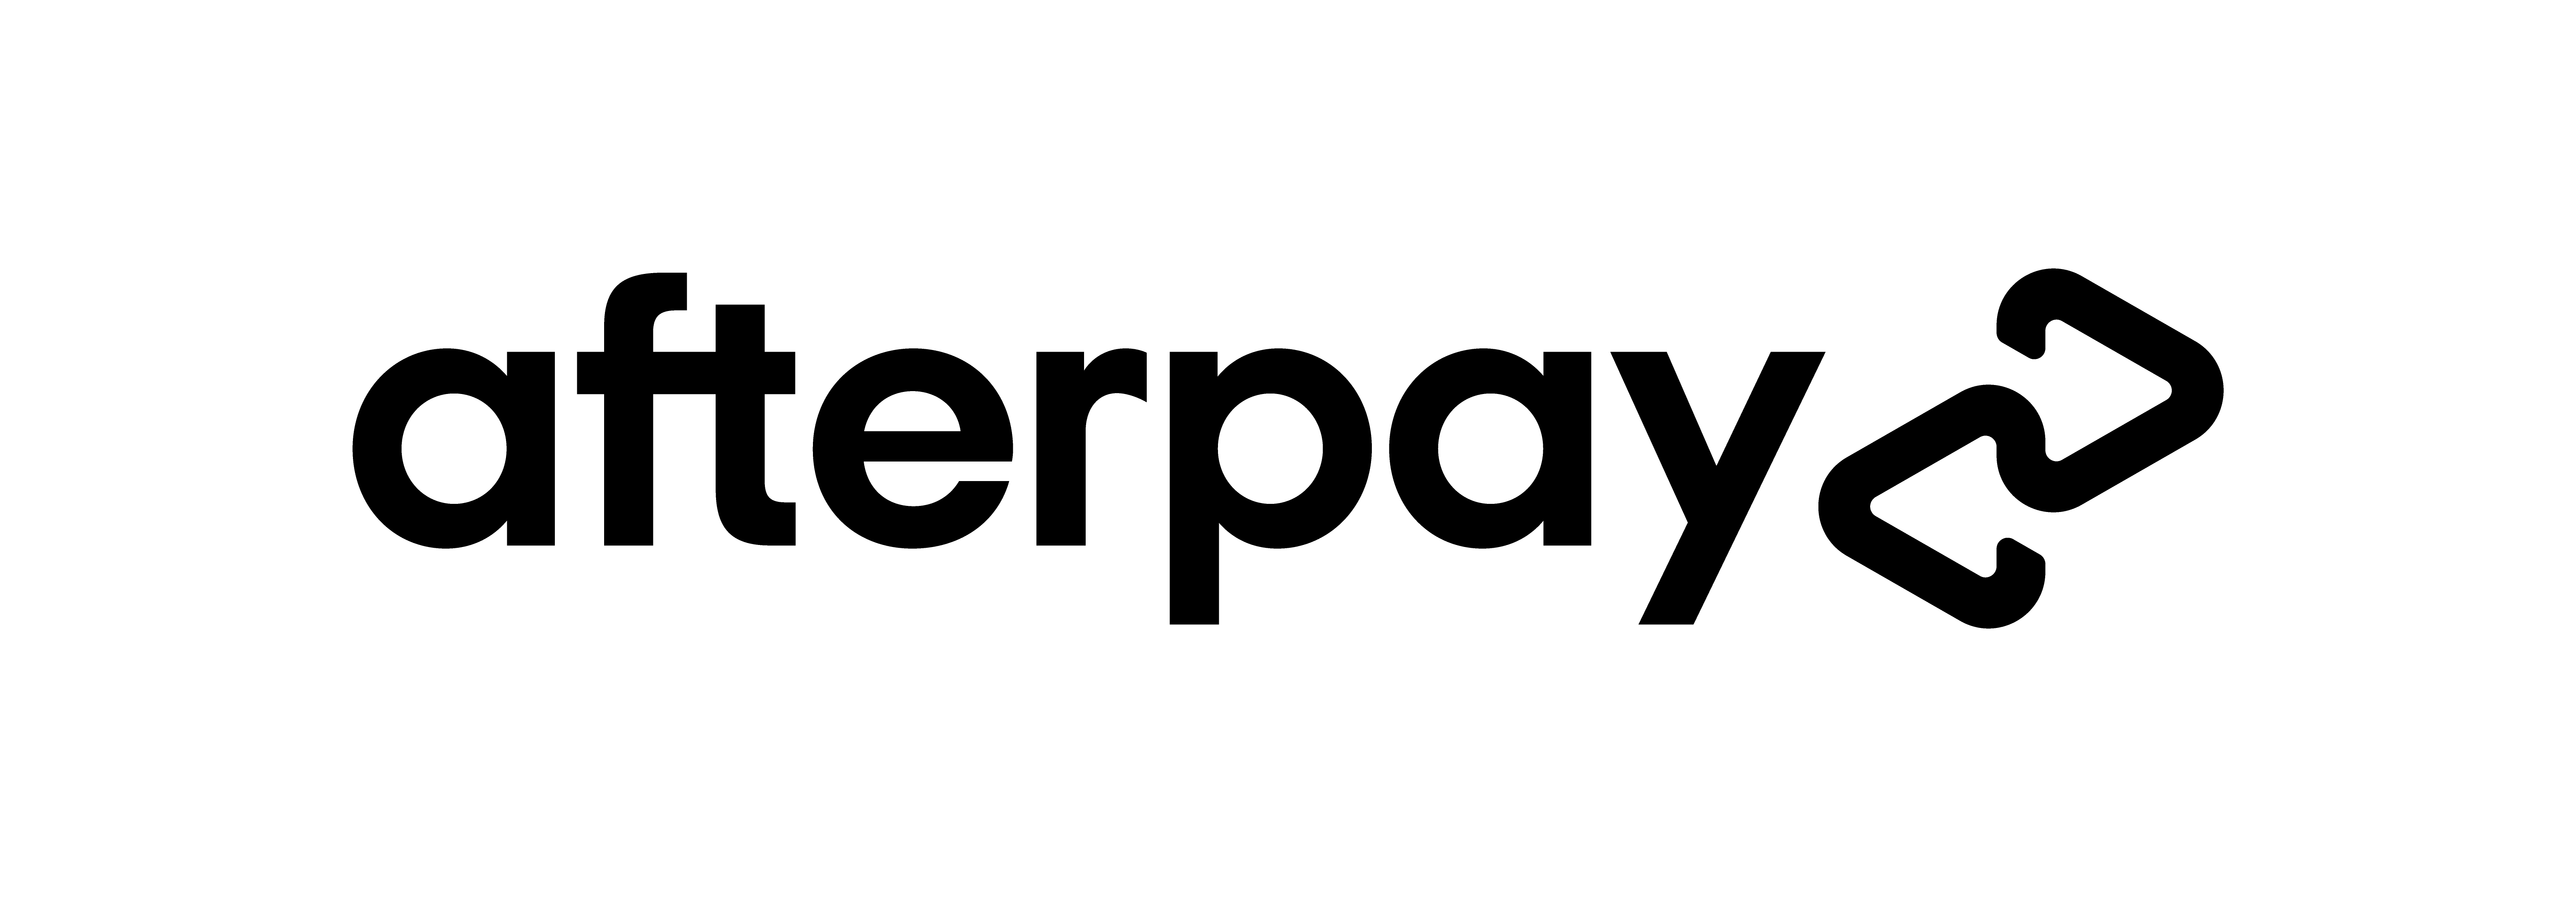 Afterpay_Badge_BlackonWhite.png